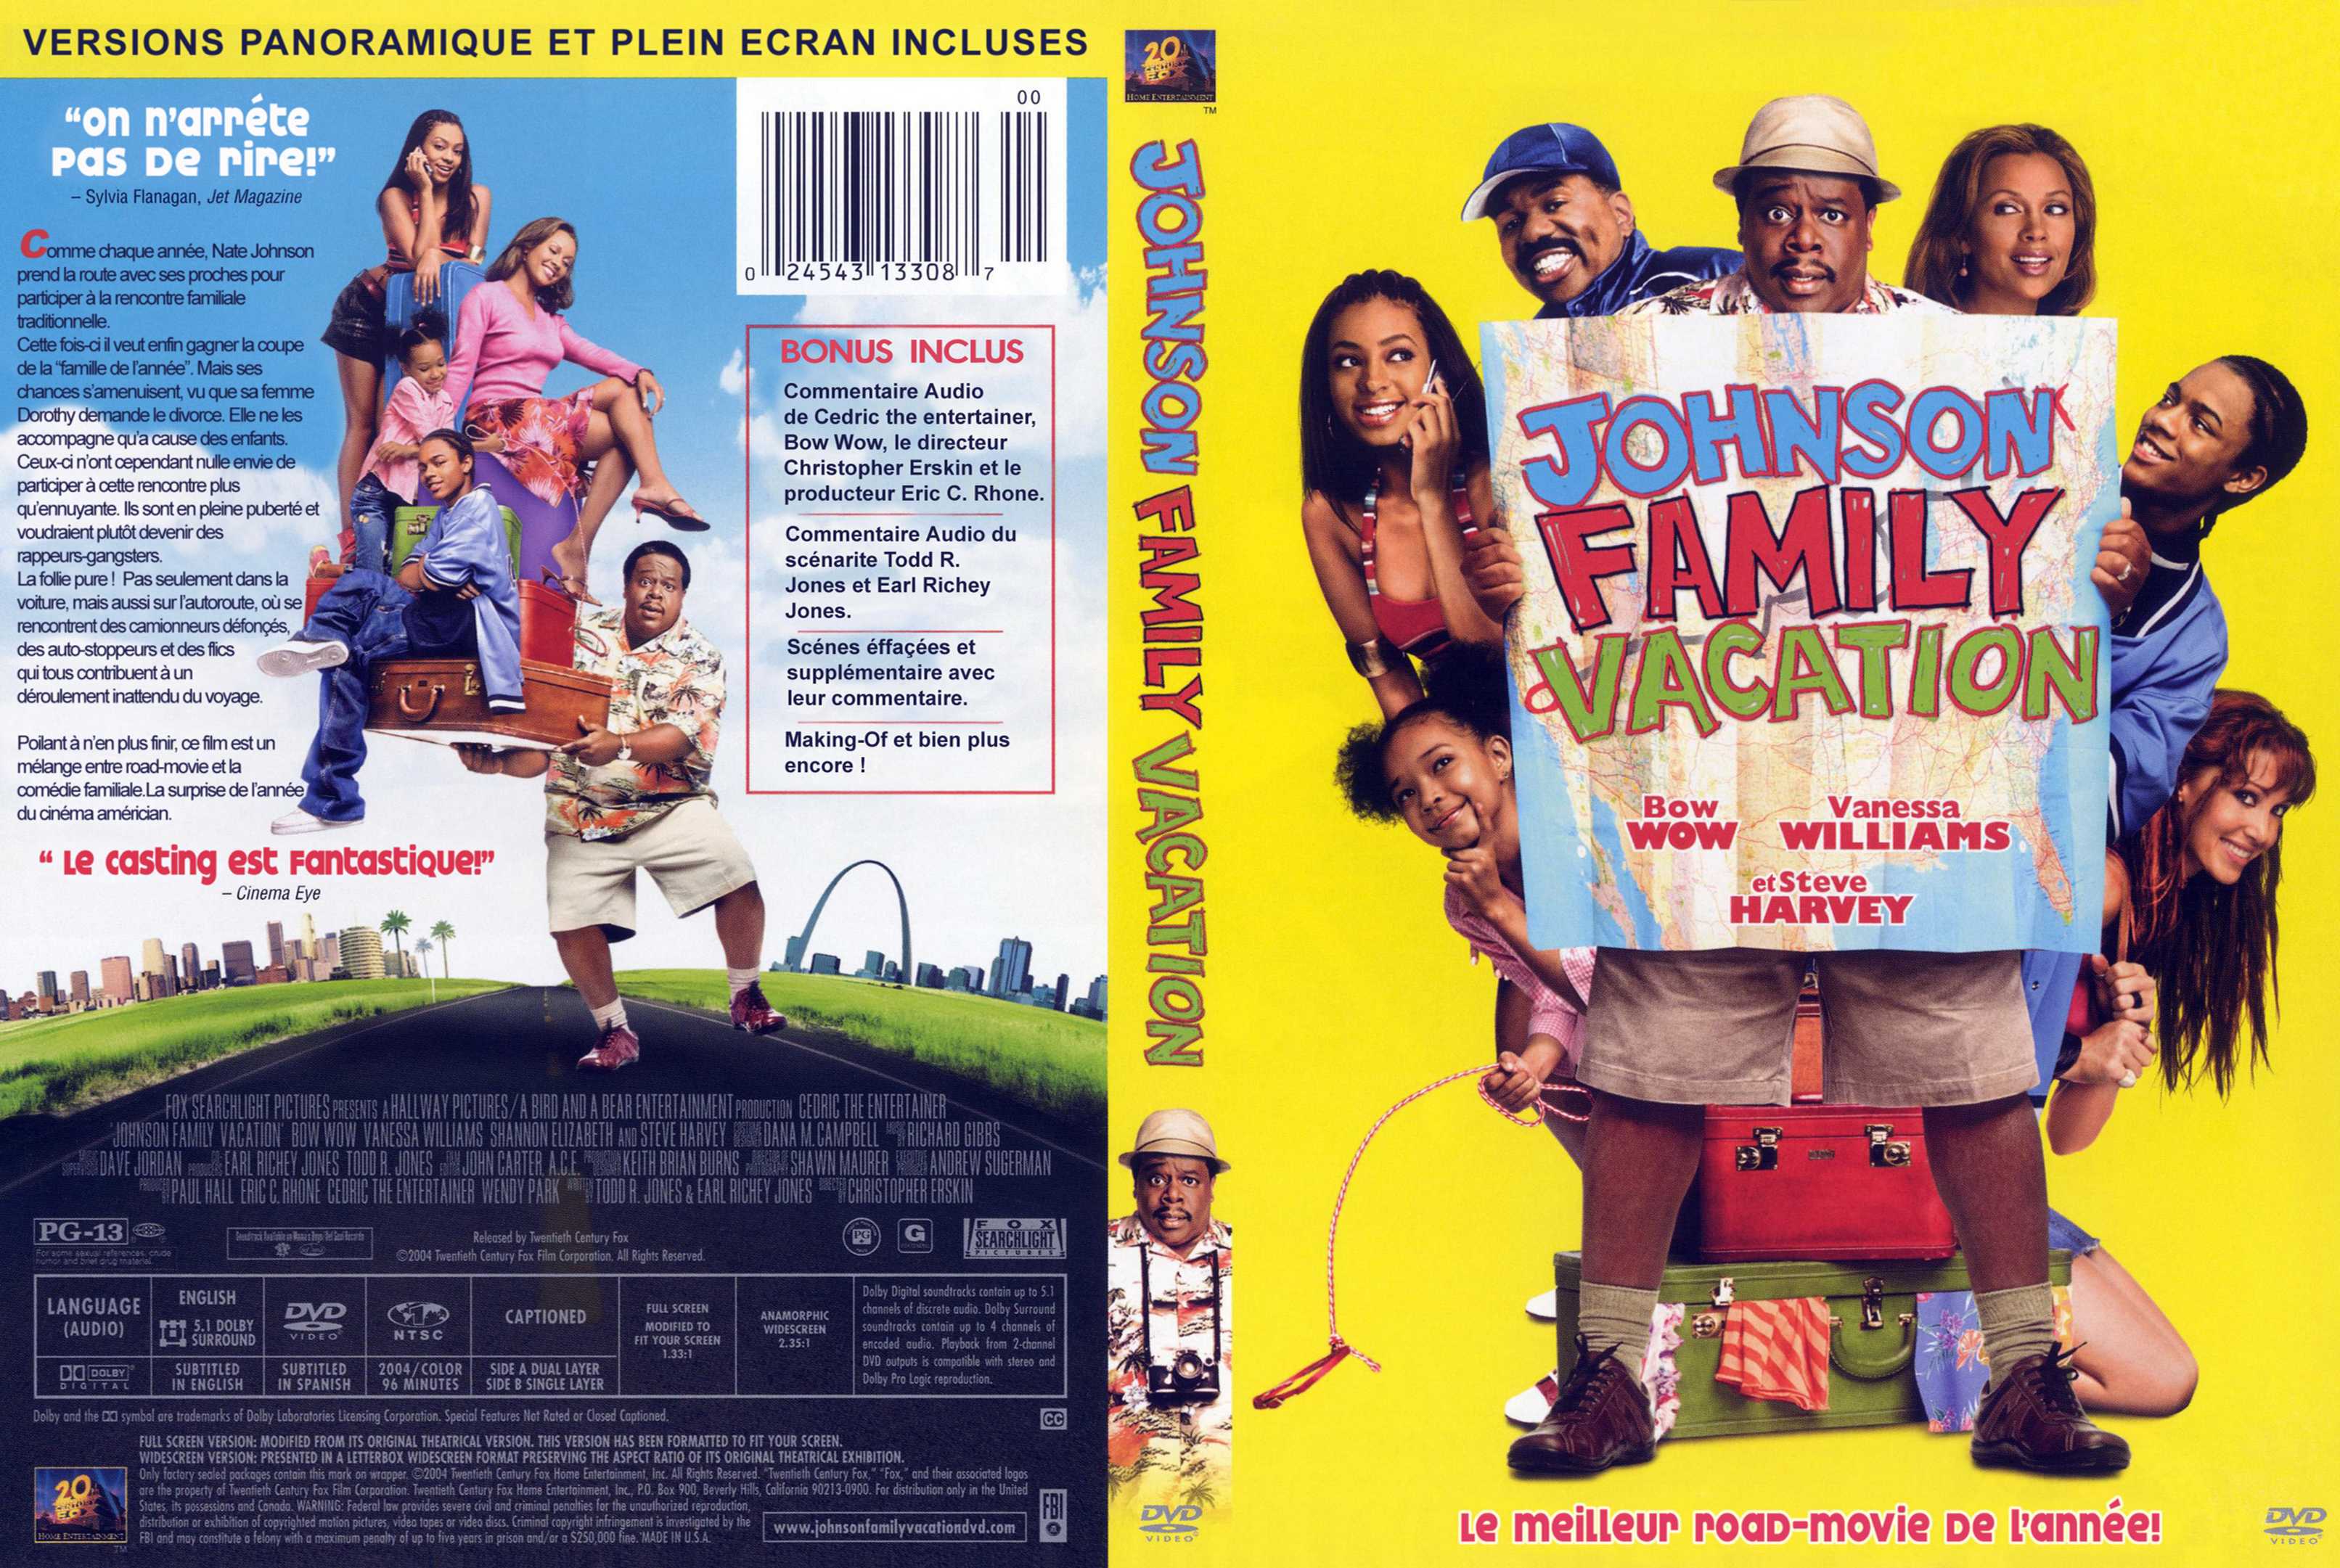 Jaquette DVD Johnson Family Vacation v2